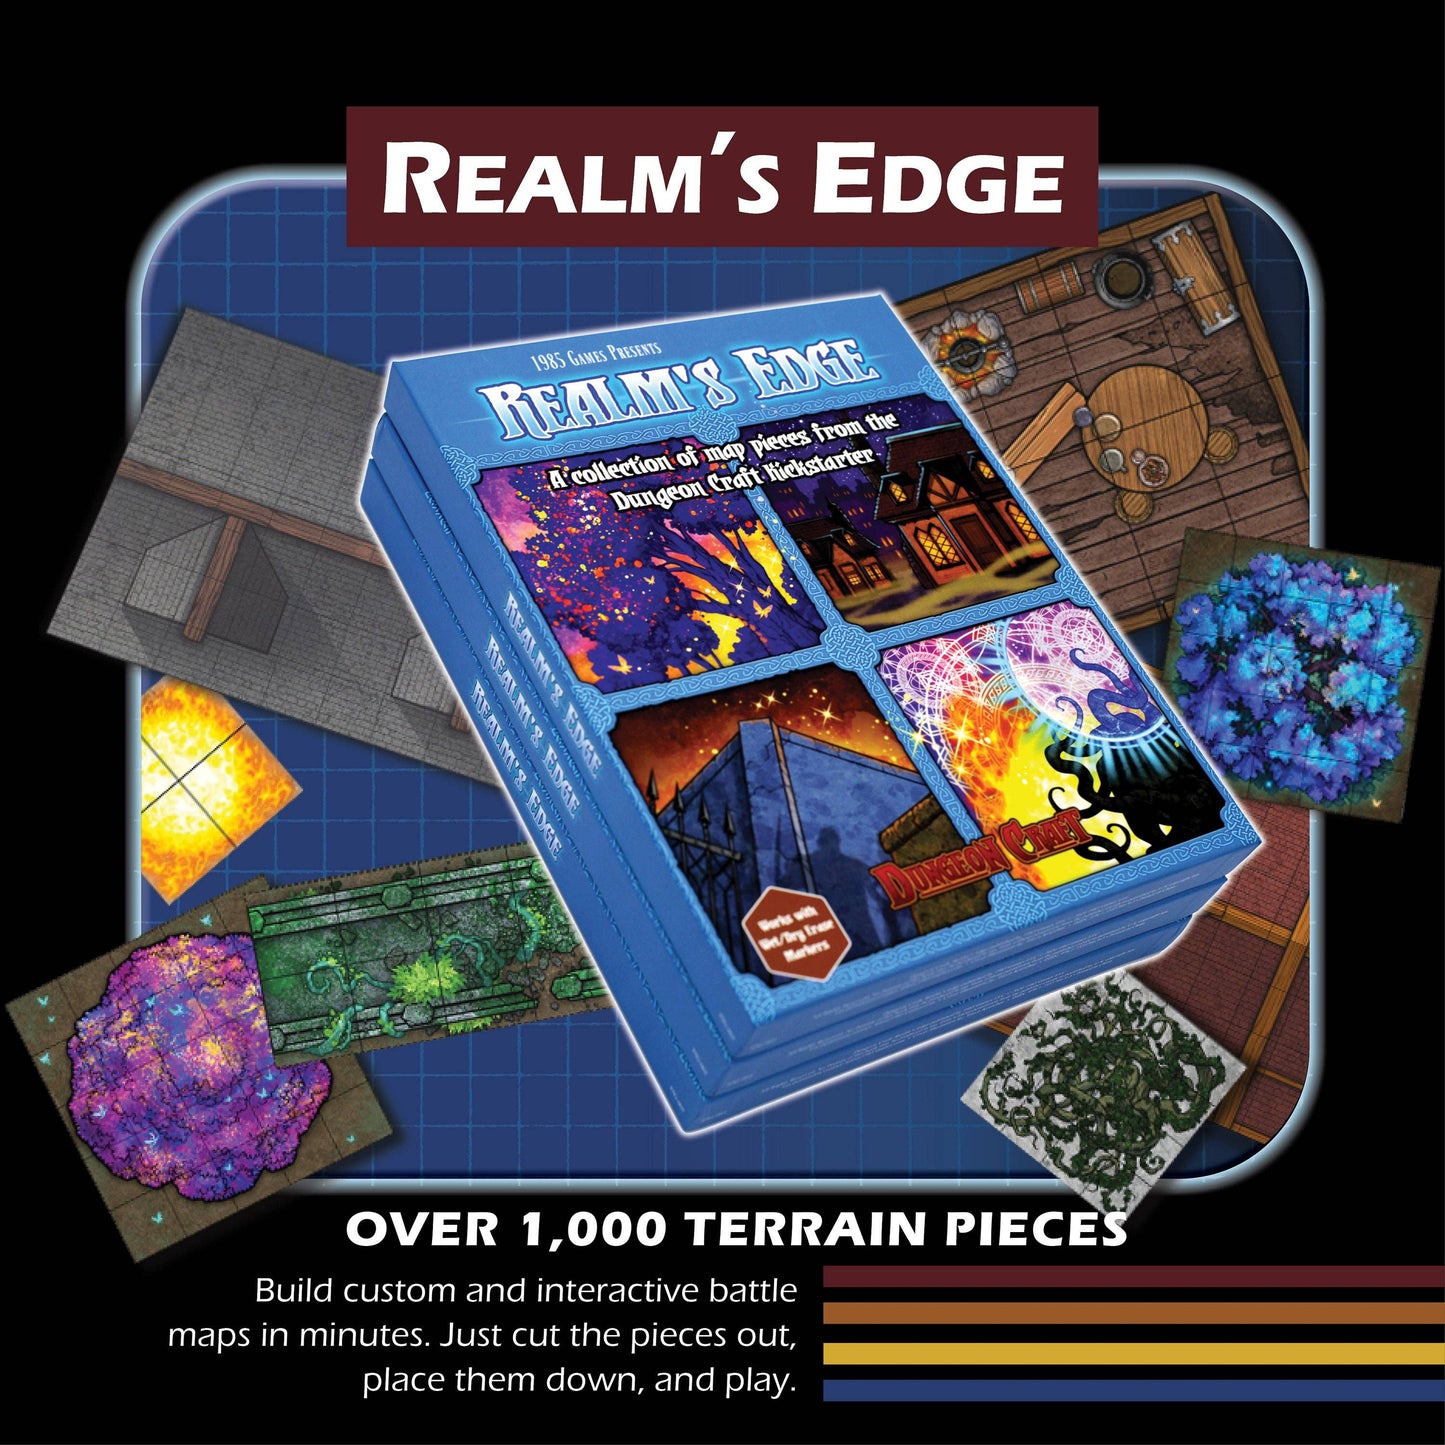 Dungeon Craft - Realms Edge Book 2D Terrain for Dnd